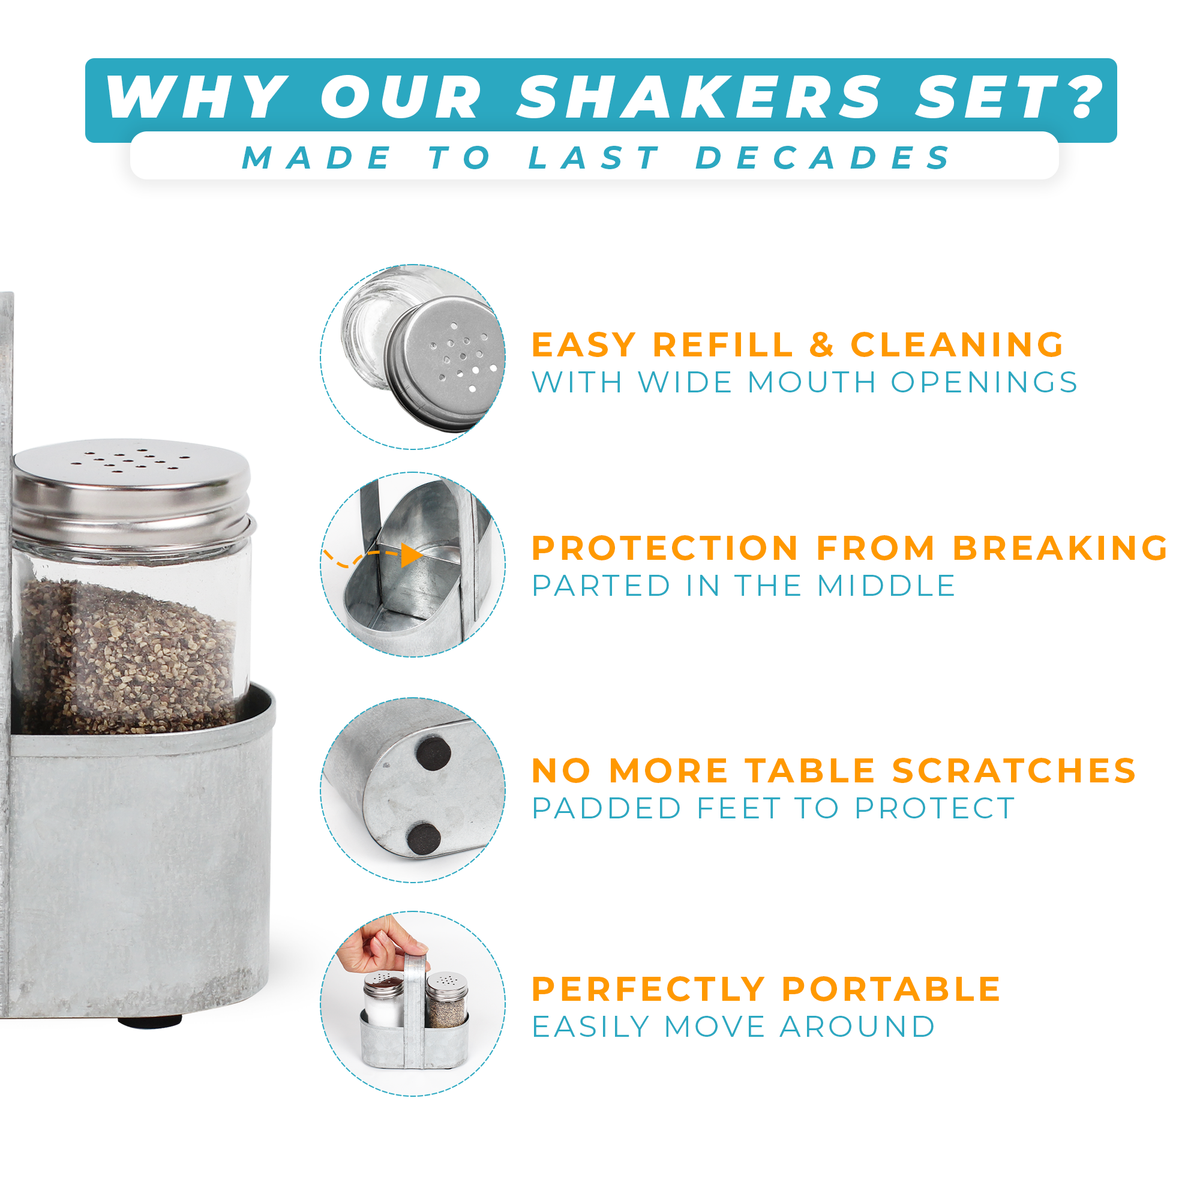 Why Saratoga Home&#39;s shakers set? A product that is made to last decades